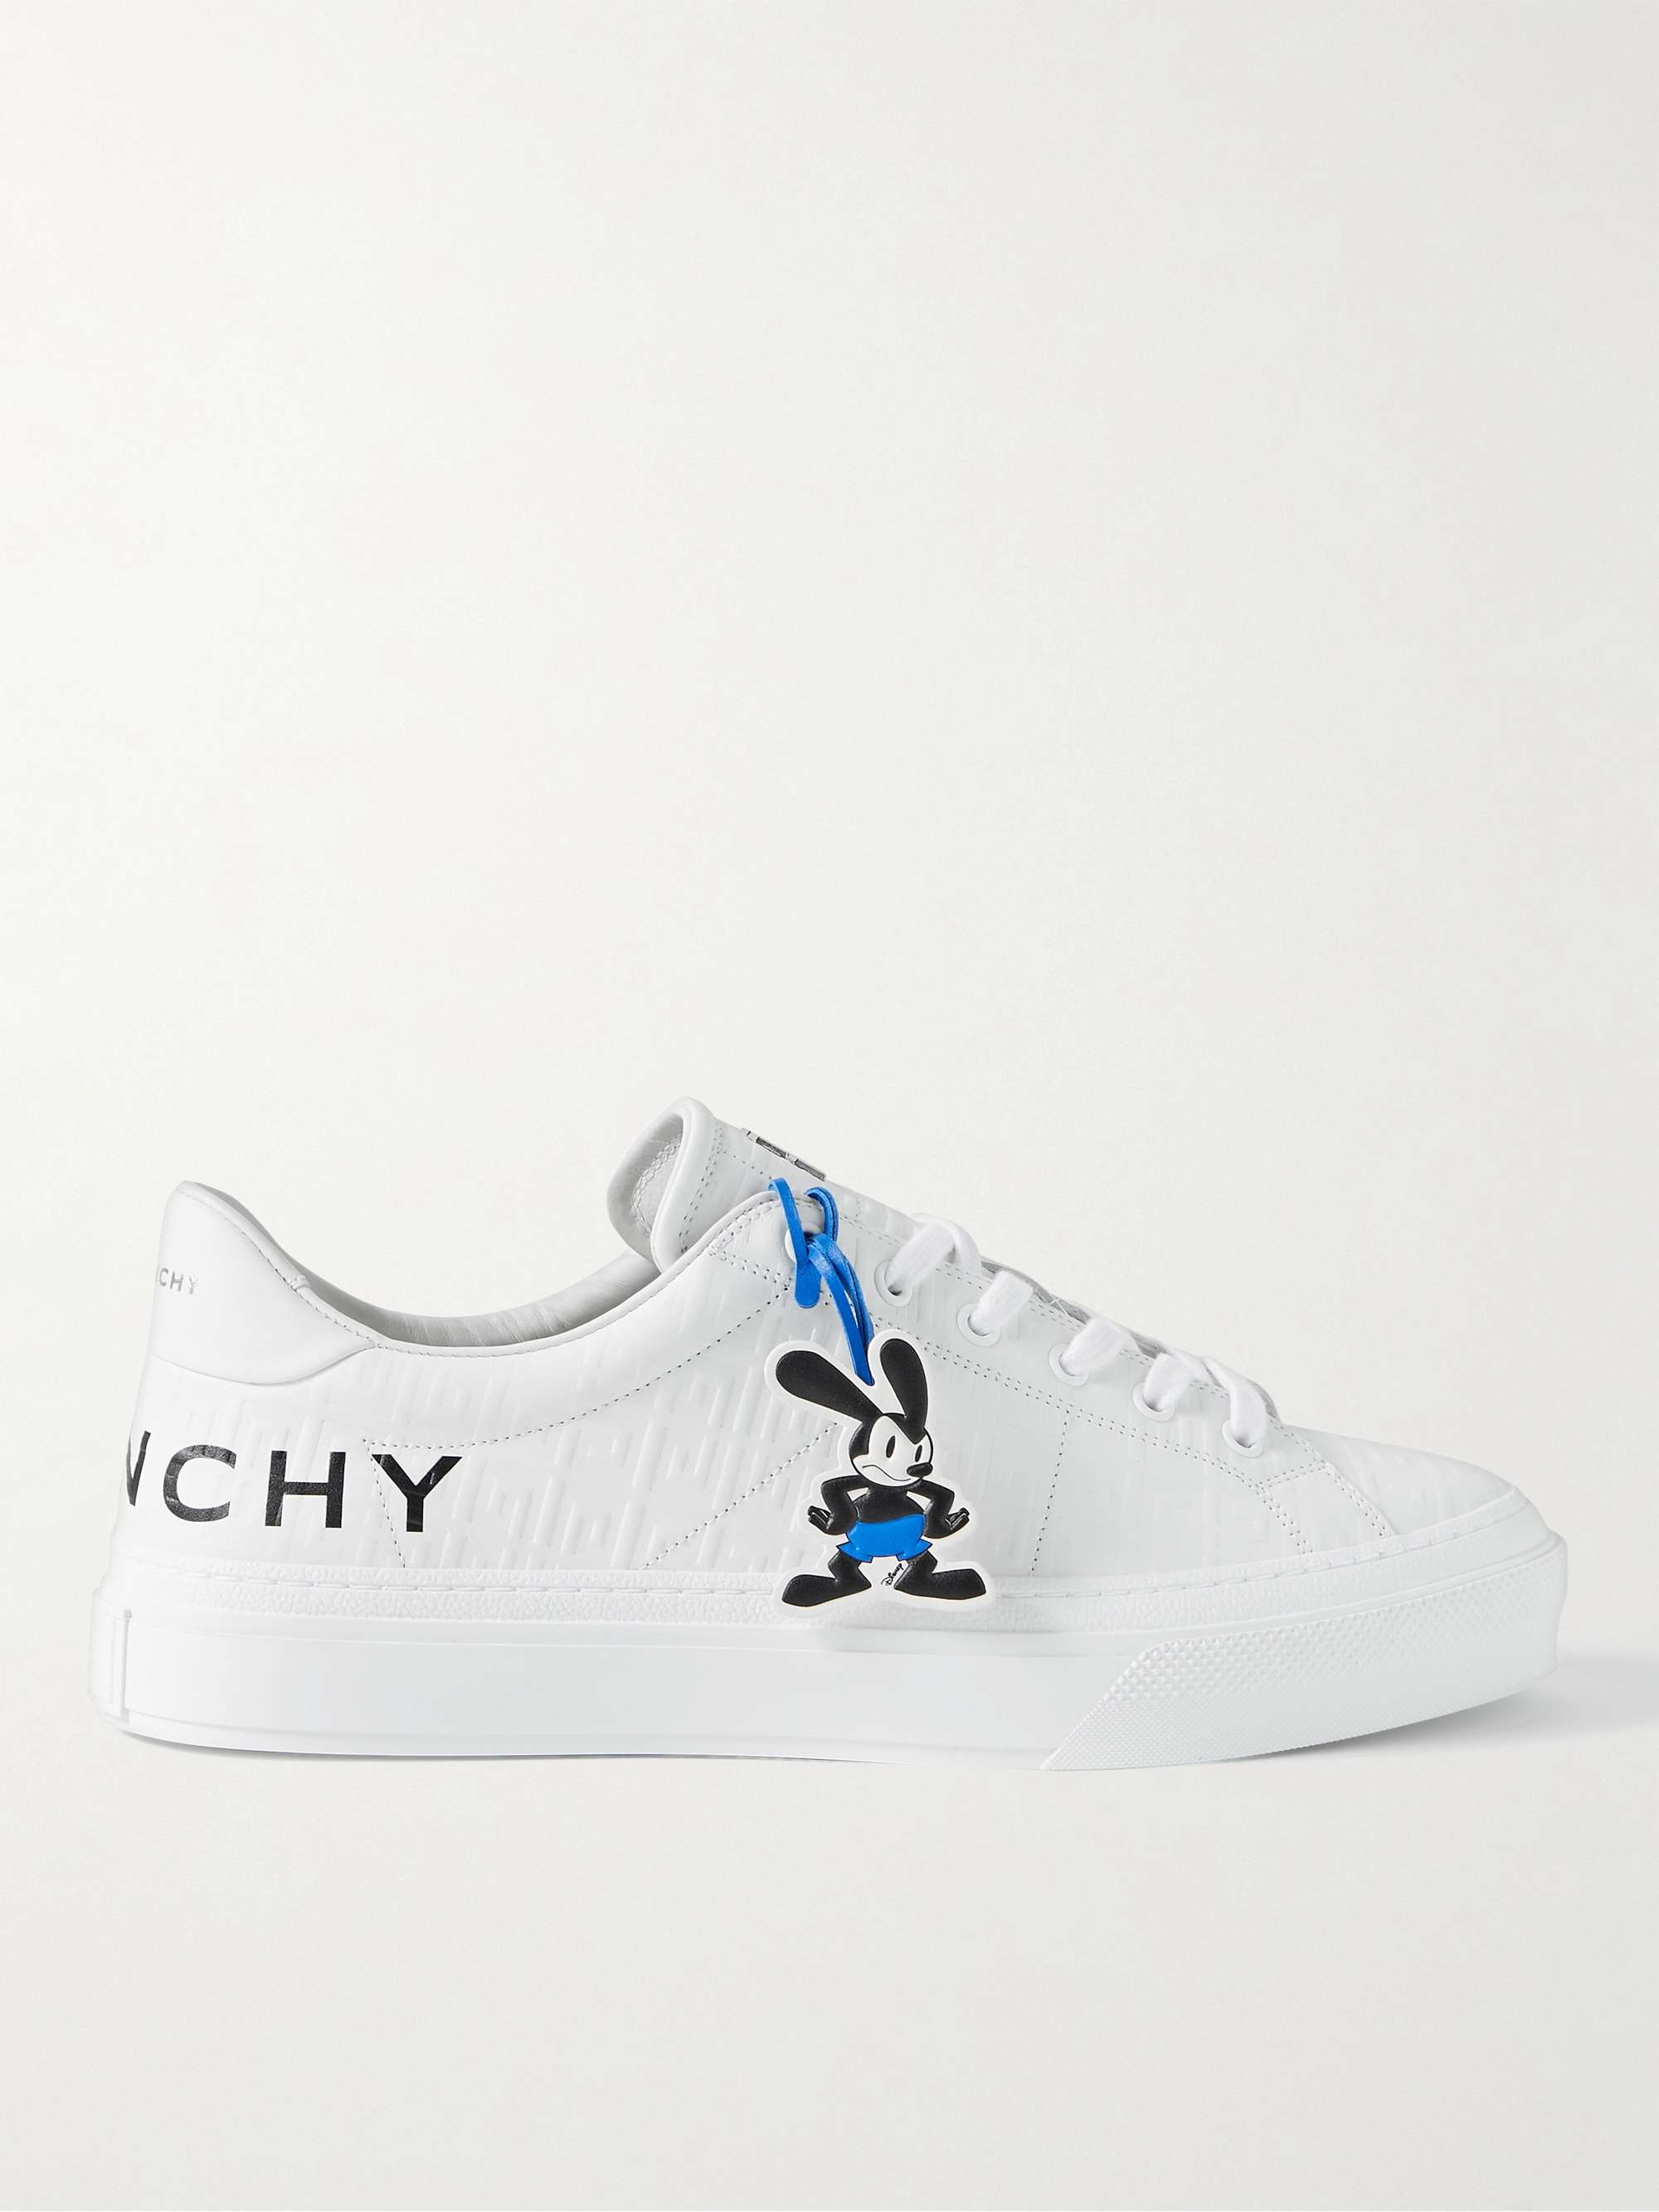 GIVENCHY + Disney Oswald City Sport Debossed Leather Sneakers